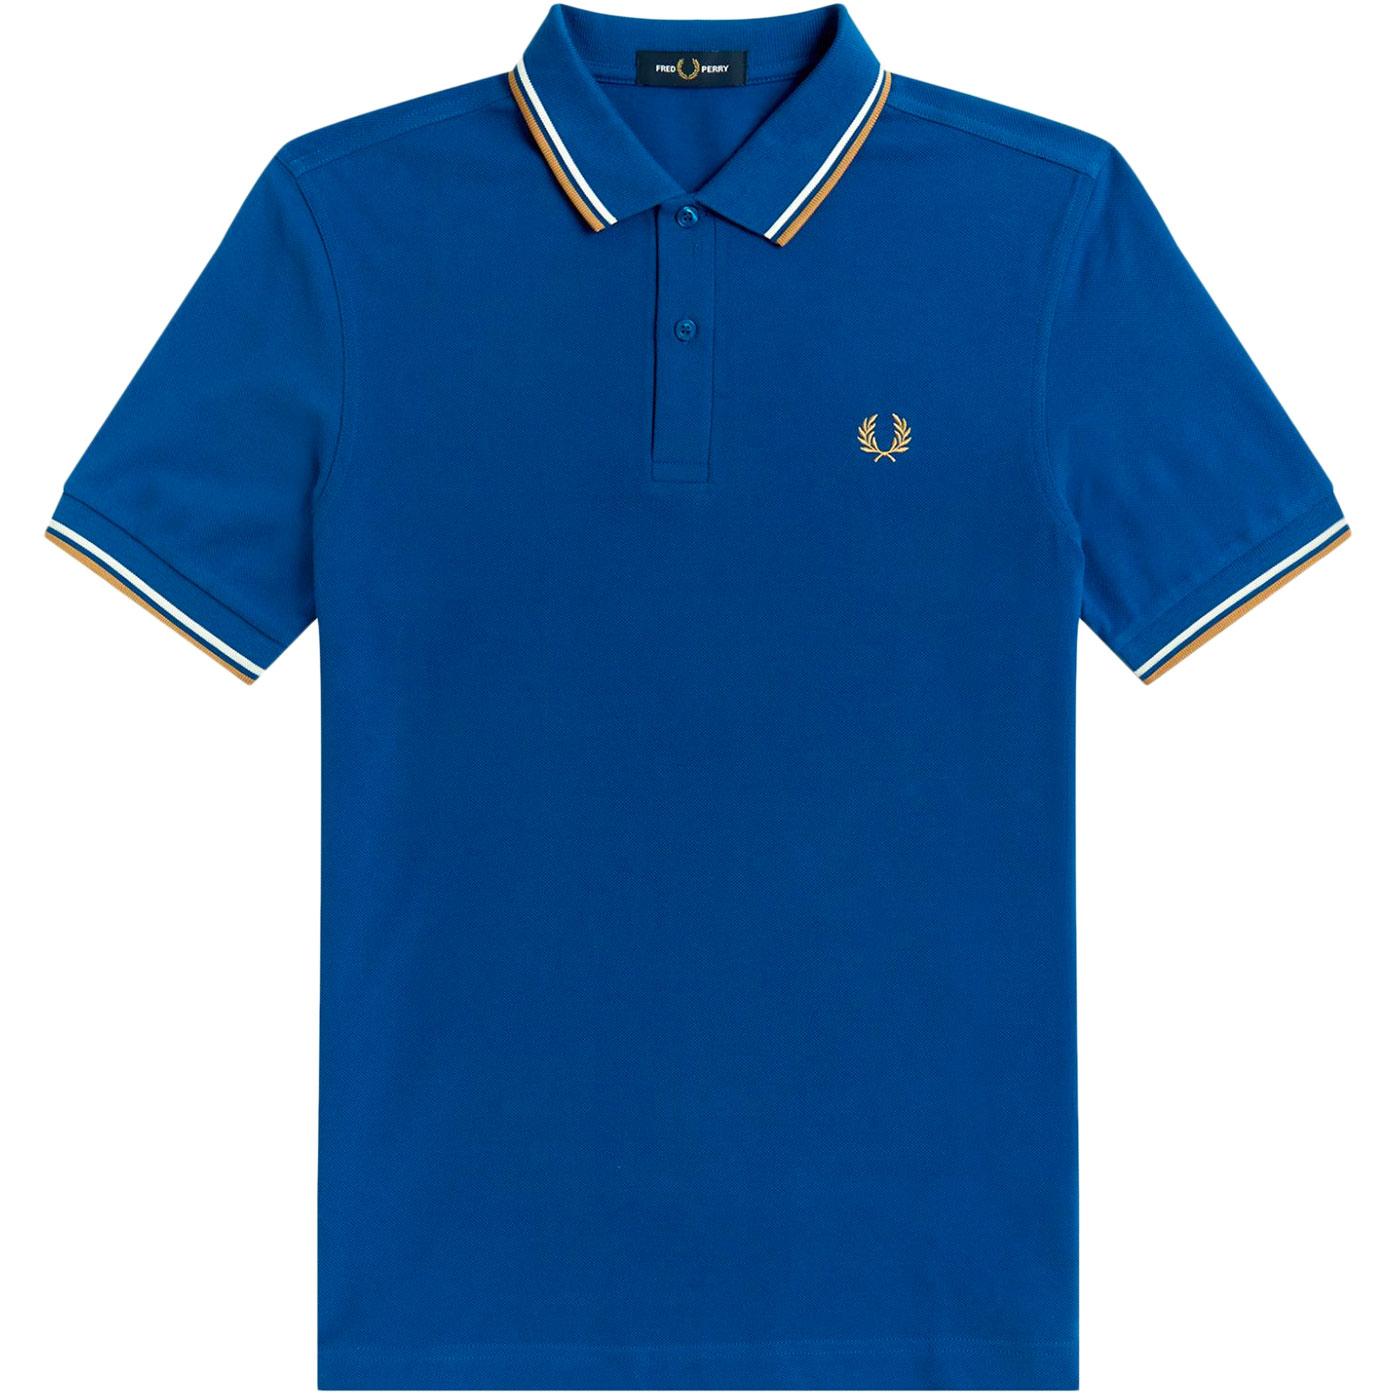 FRED PERRY M3600 111 Twin Tipped Mod Polo Top MB